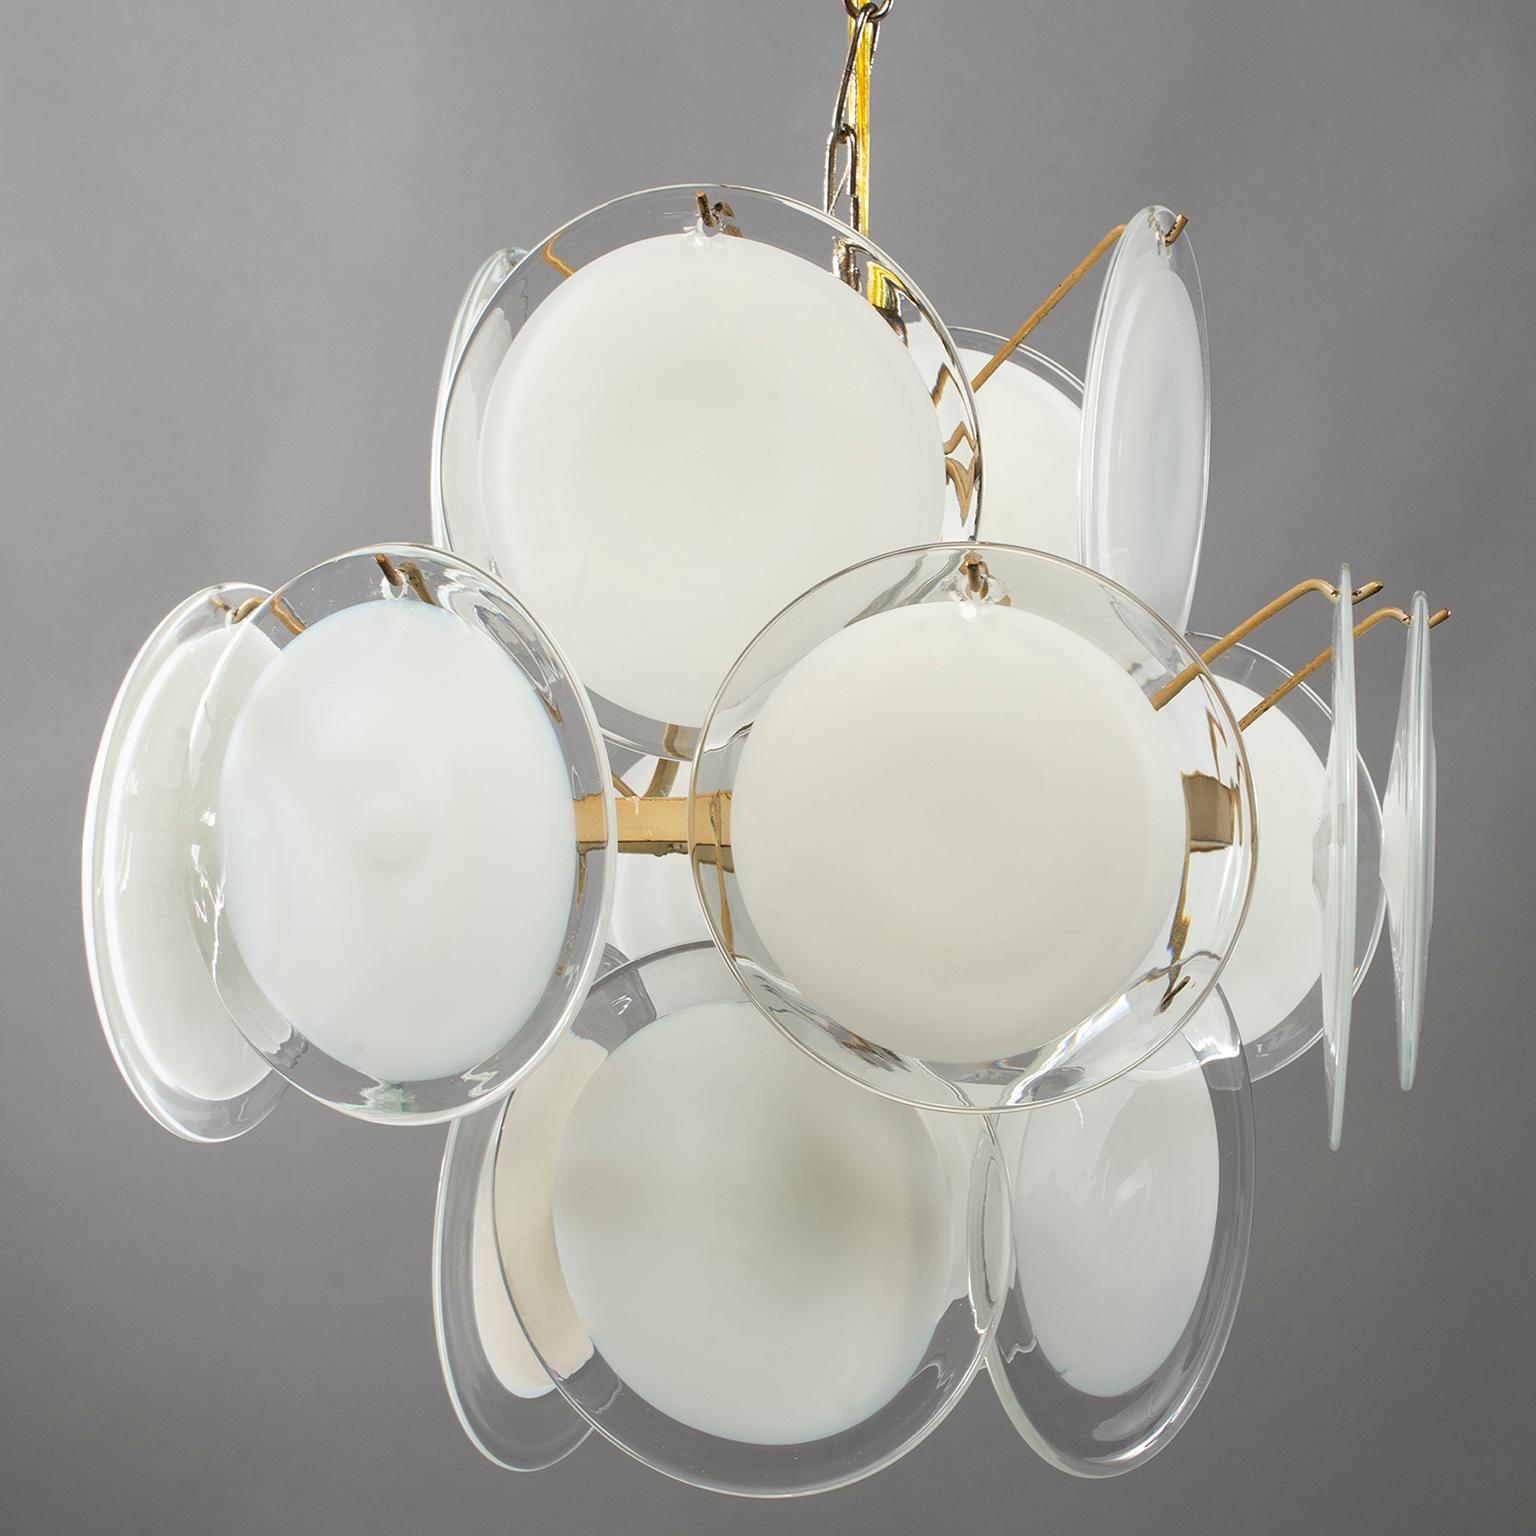 Murano glass chandelier manufactured by Vistosi features a brass plated metal base with three tiers of suspended glass disks. Round glass elements are opaque white at the centre with clear edges. Chandelier has been rewired for US electrical